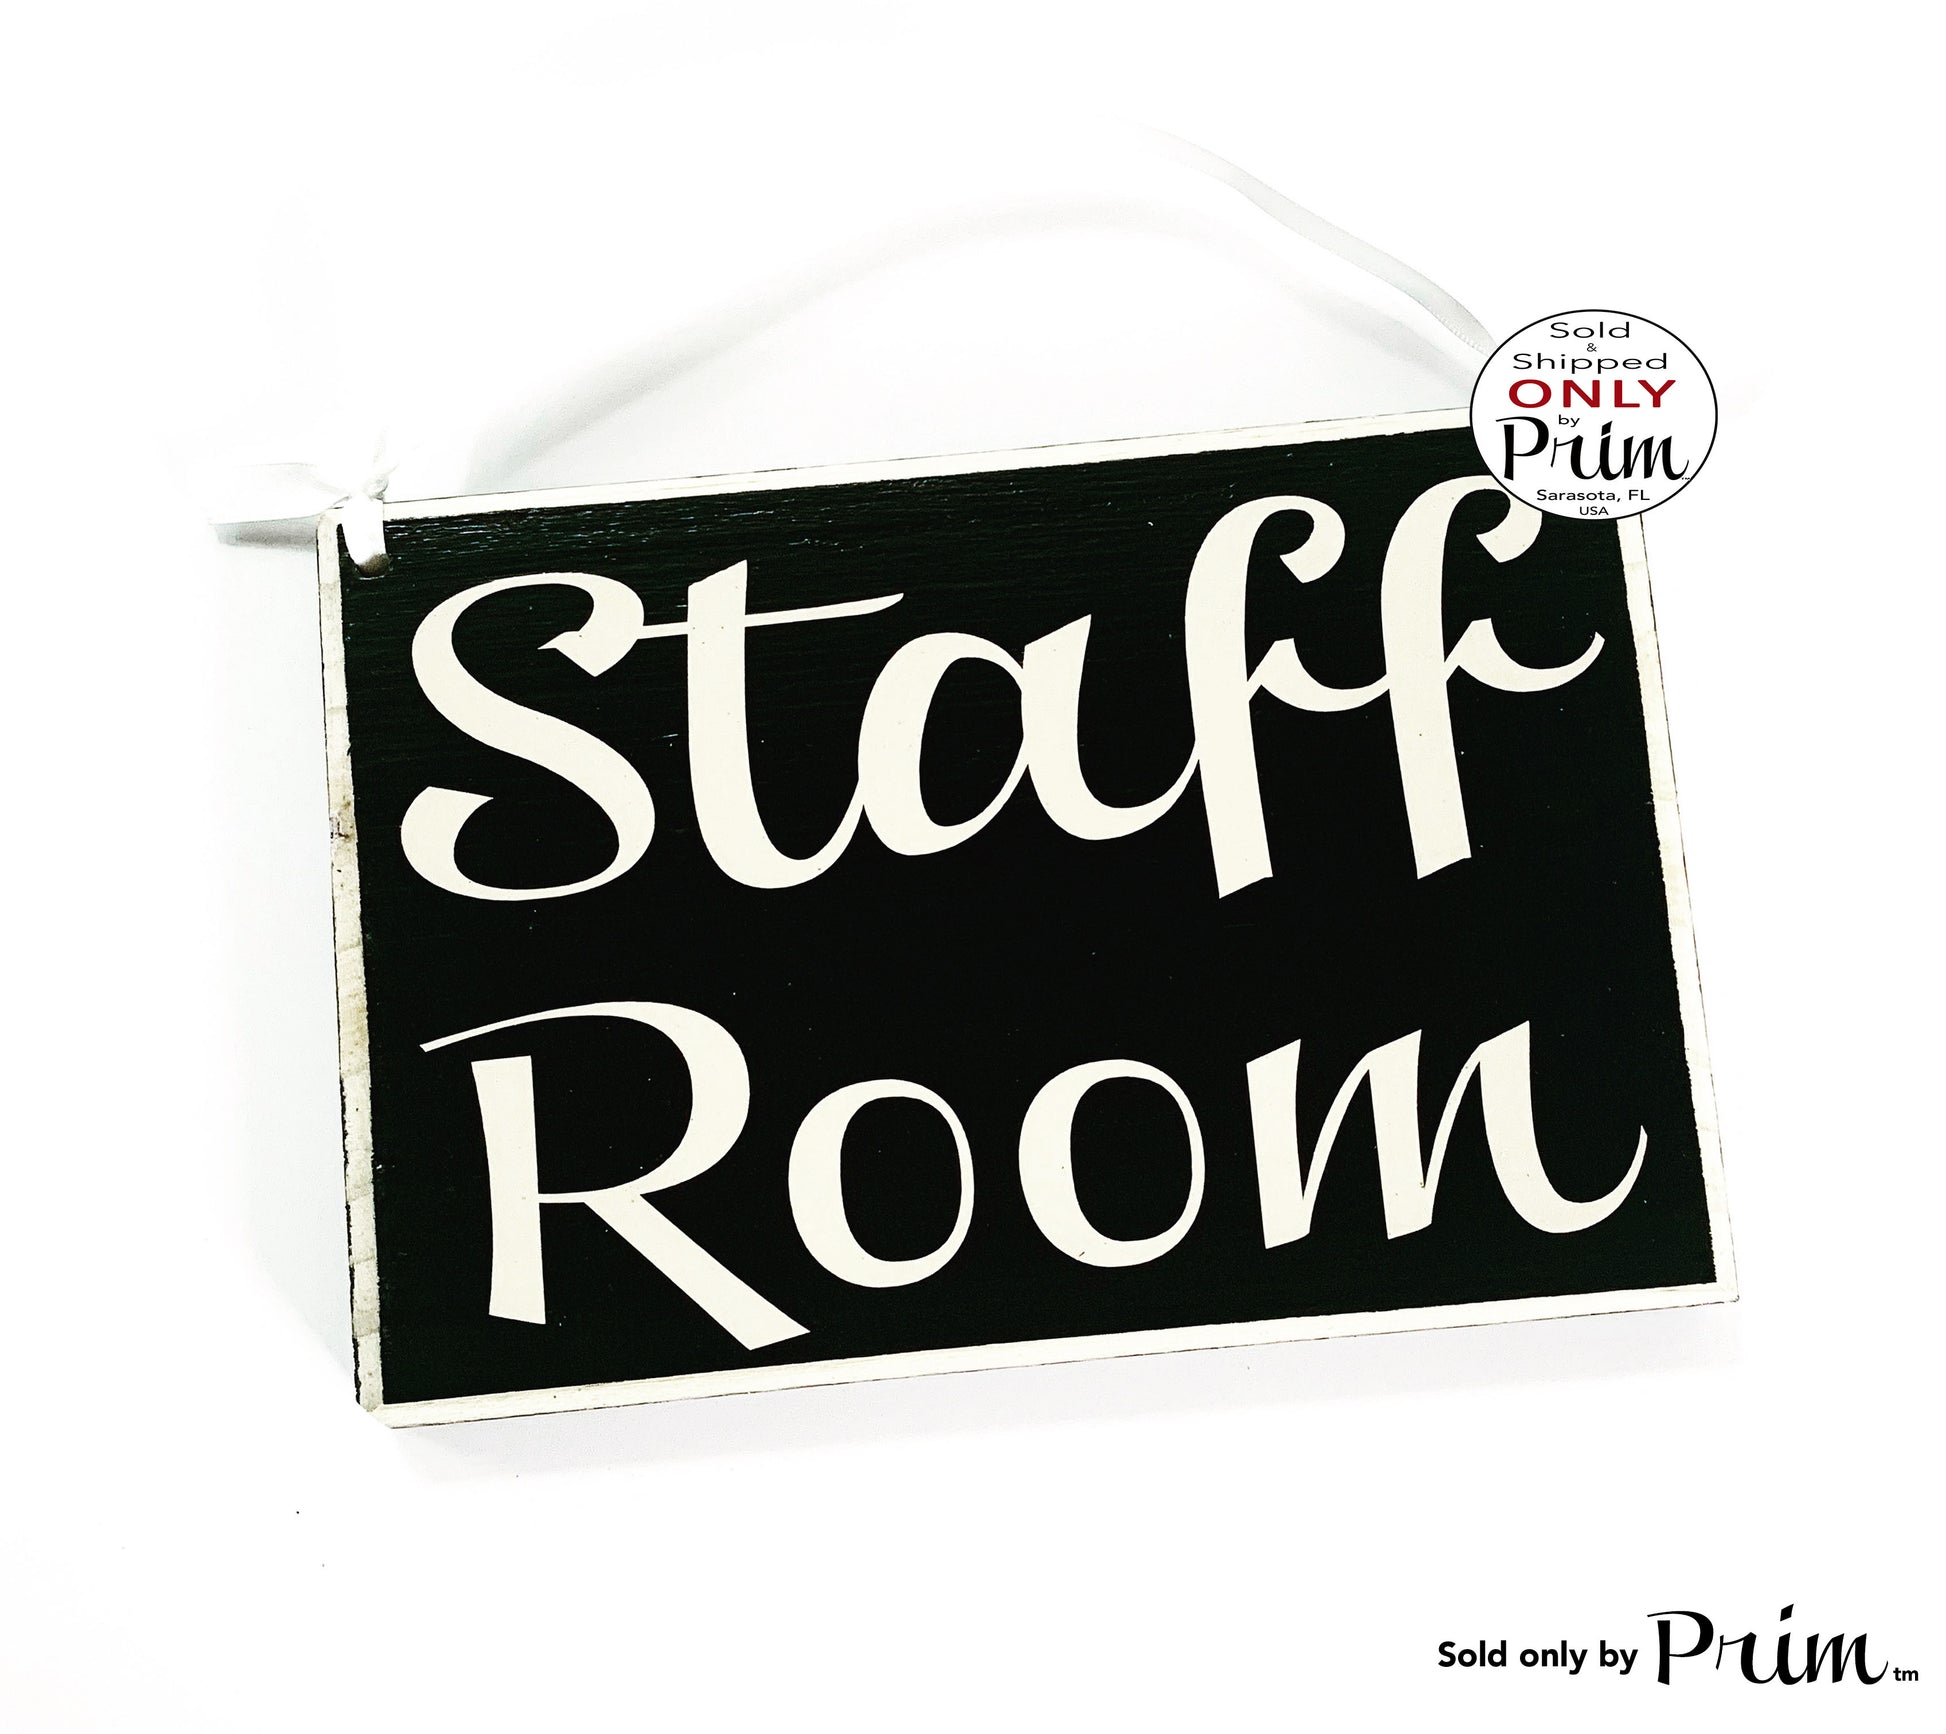 8x6 Staff Room Custom Wood Sign Employees Please Do Not Enter Office Private No Entry Business Store Shop Salon Spa Wall Decor Door Plaque Designs by Prim